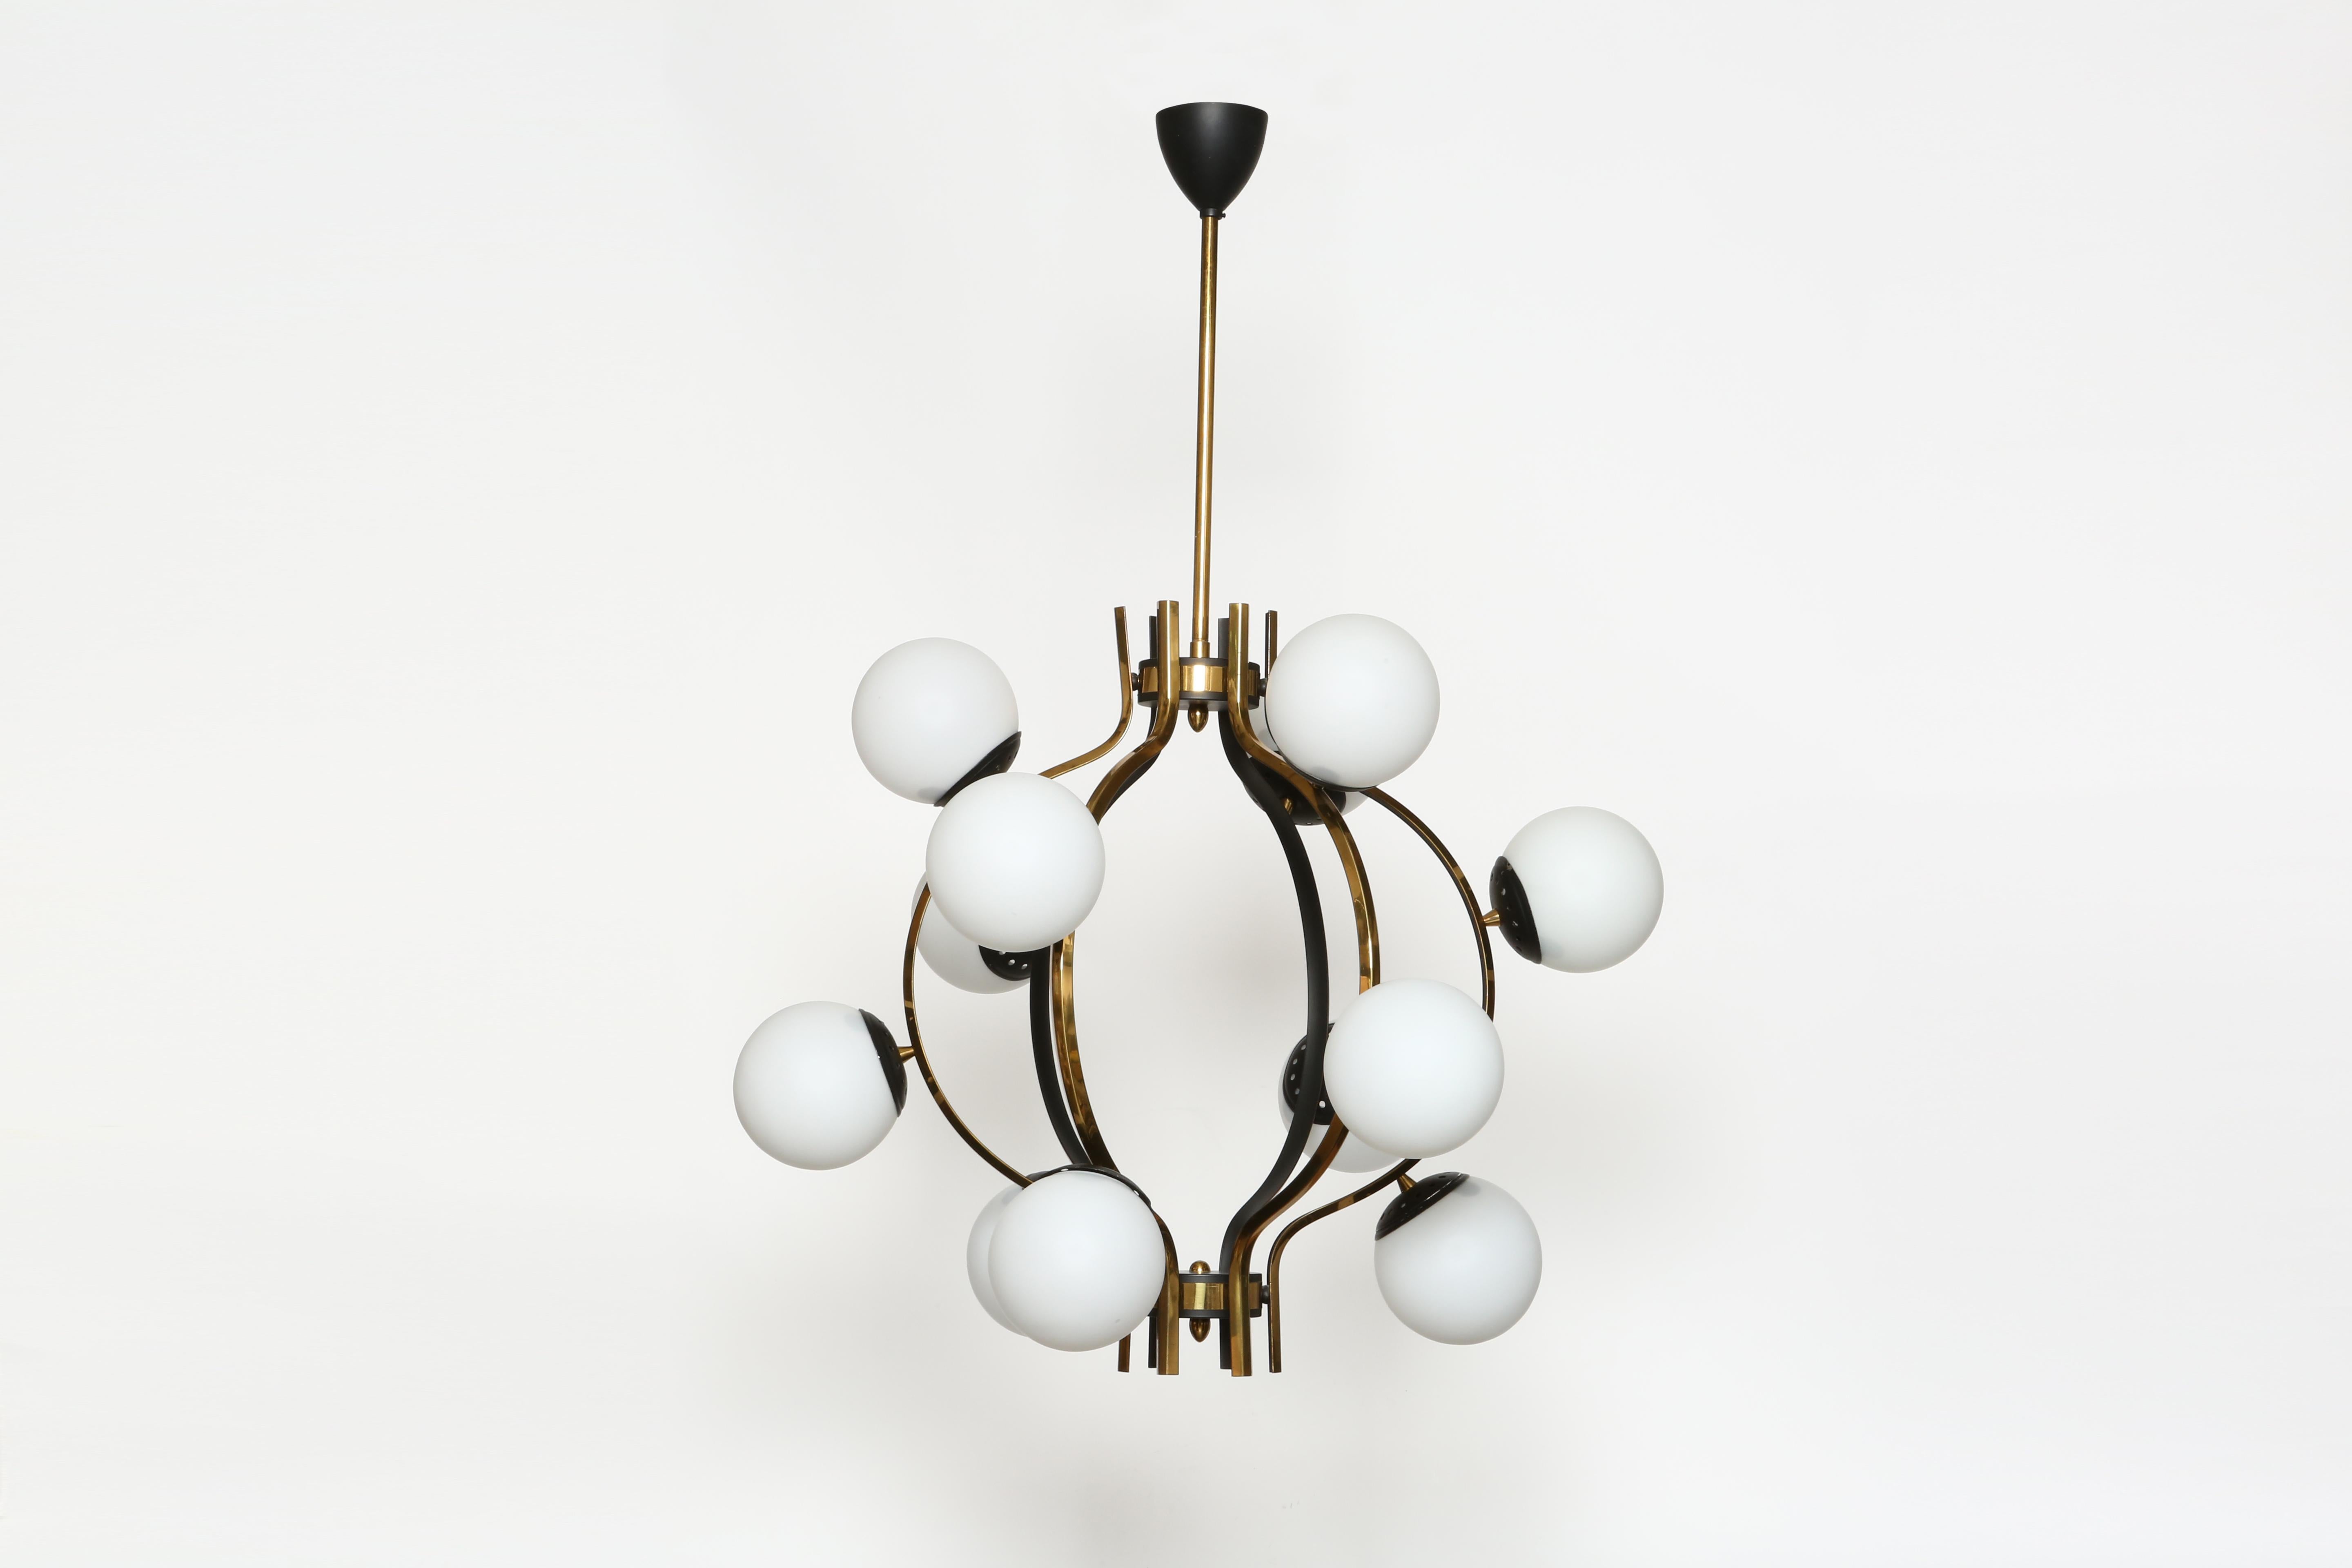 Stilnovo chandelier.
Italy 1960s
Made with opaline glass, brass, enameled metal.
12 globes.
Takes 12 Edison base  bulbs.
Complimentary US rewiring upon request.
Overall drop is adjustable.
Body of the chandelier is 22 inches in height.

We take